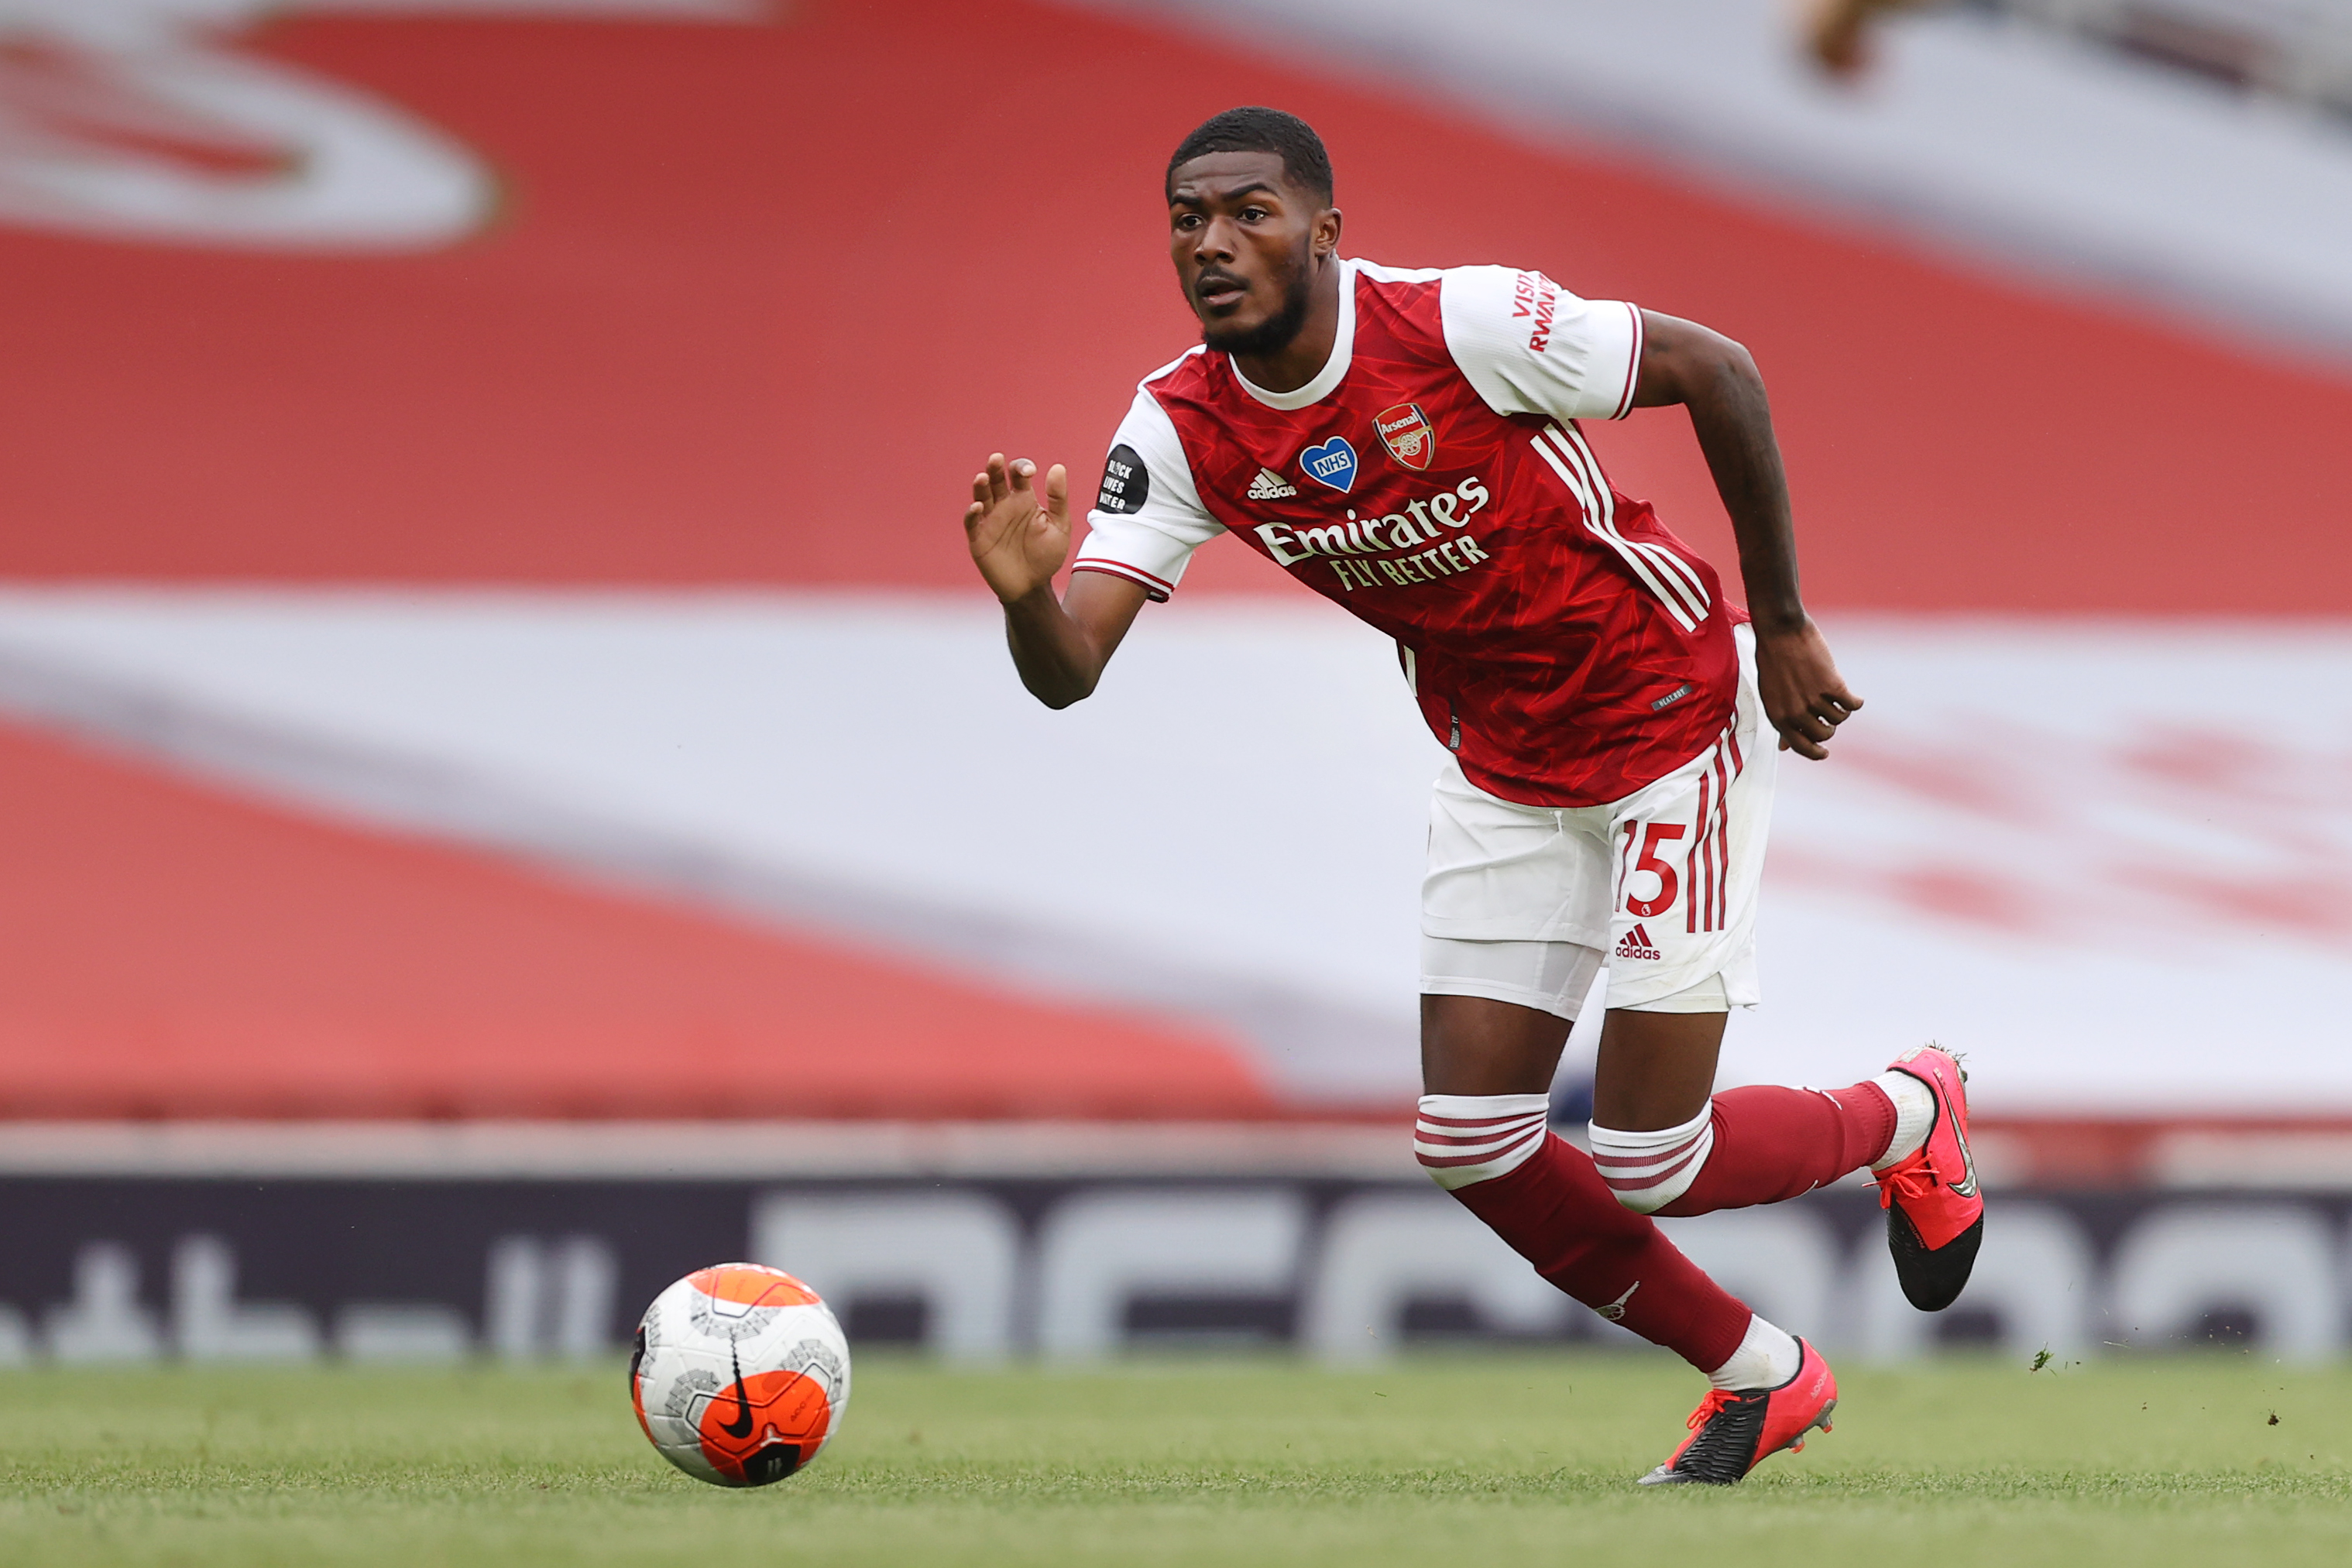 Arsenal transfer rumour round-up: Maitland-Niles set for Wolves move as Gunners eye Bayern star Thiago